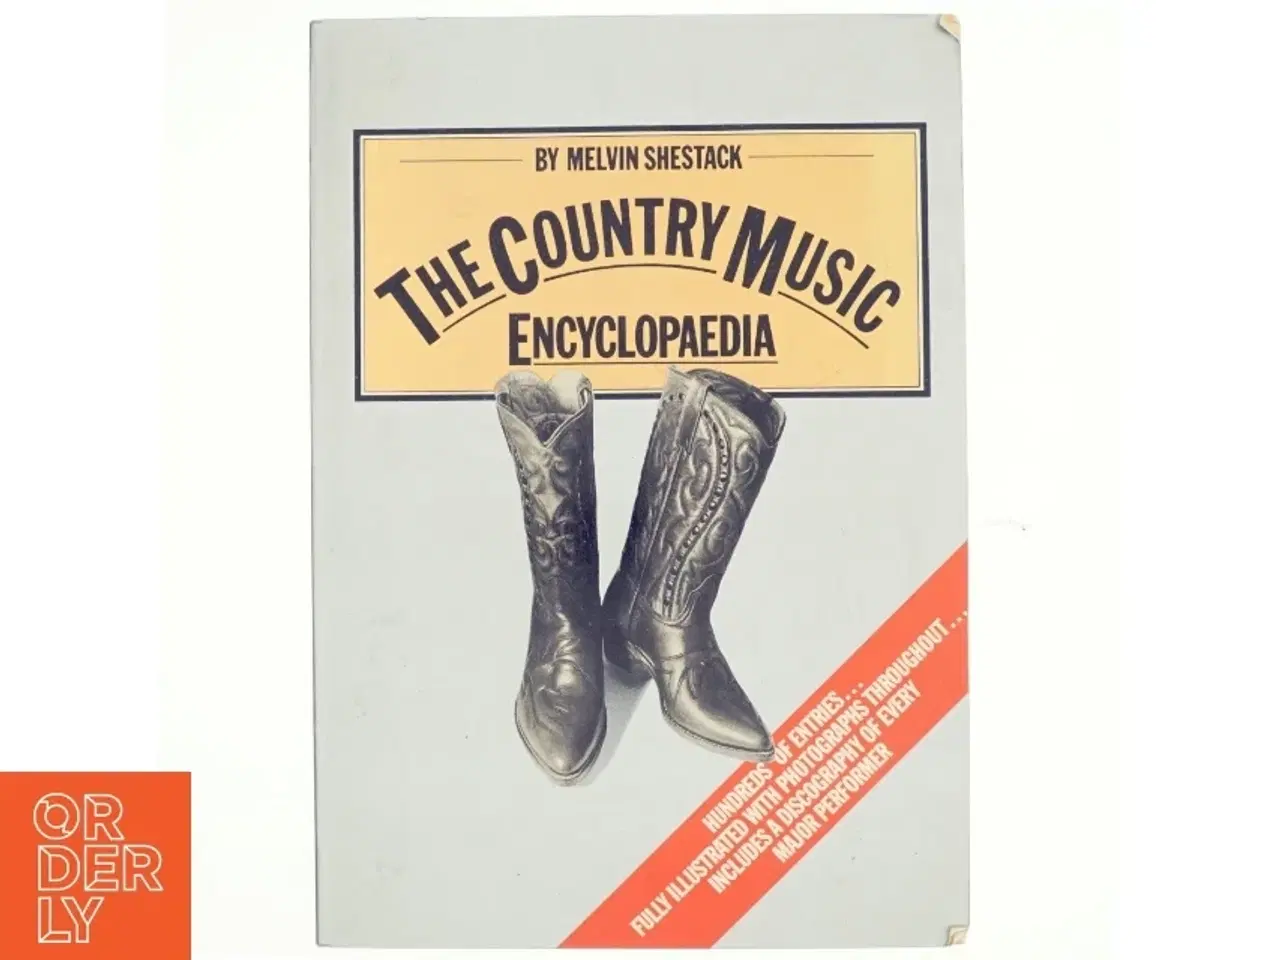 Billede 1 - The Country Music Encyclopeadia